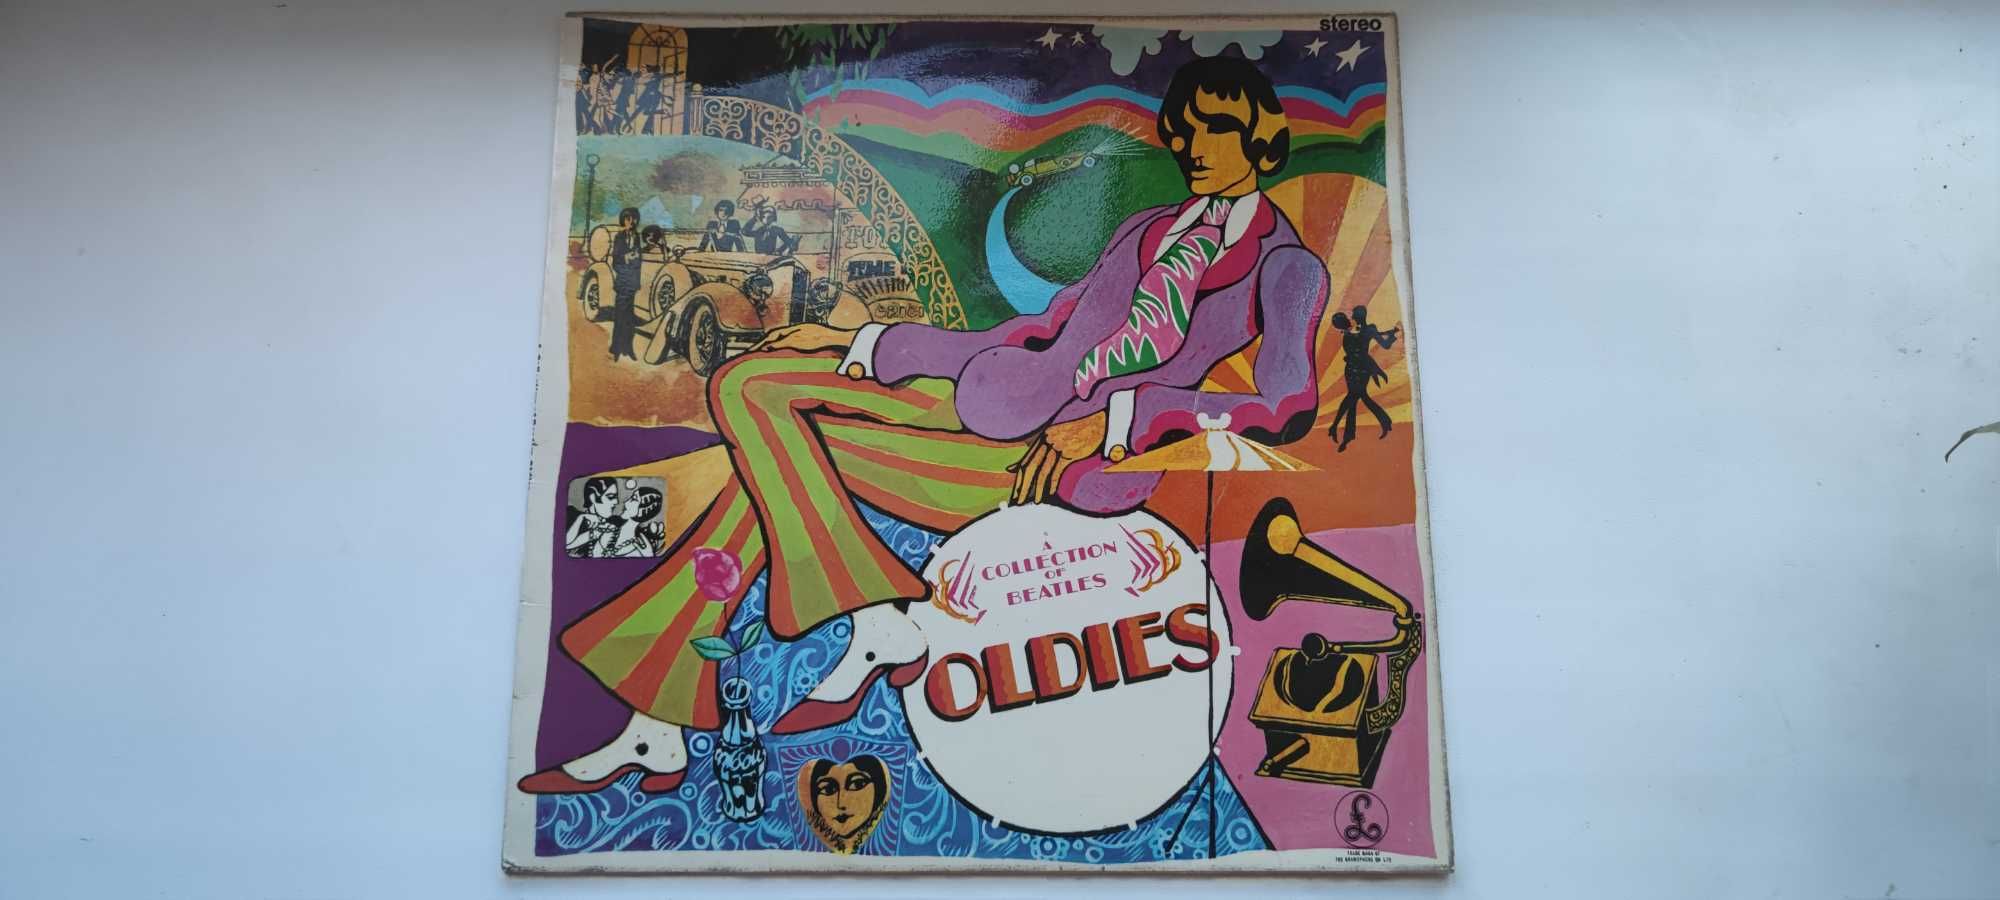 Продам пластинку The Beatles - A Collection Of A Beatles Oldies 1972